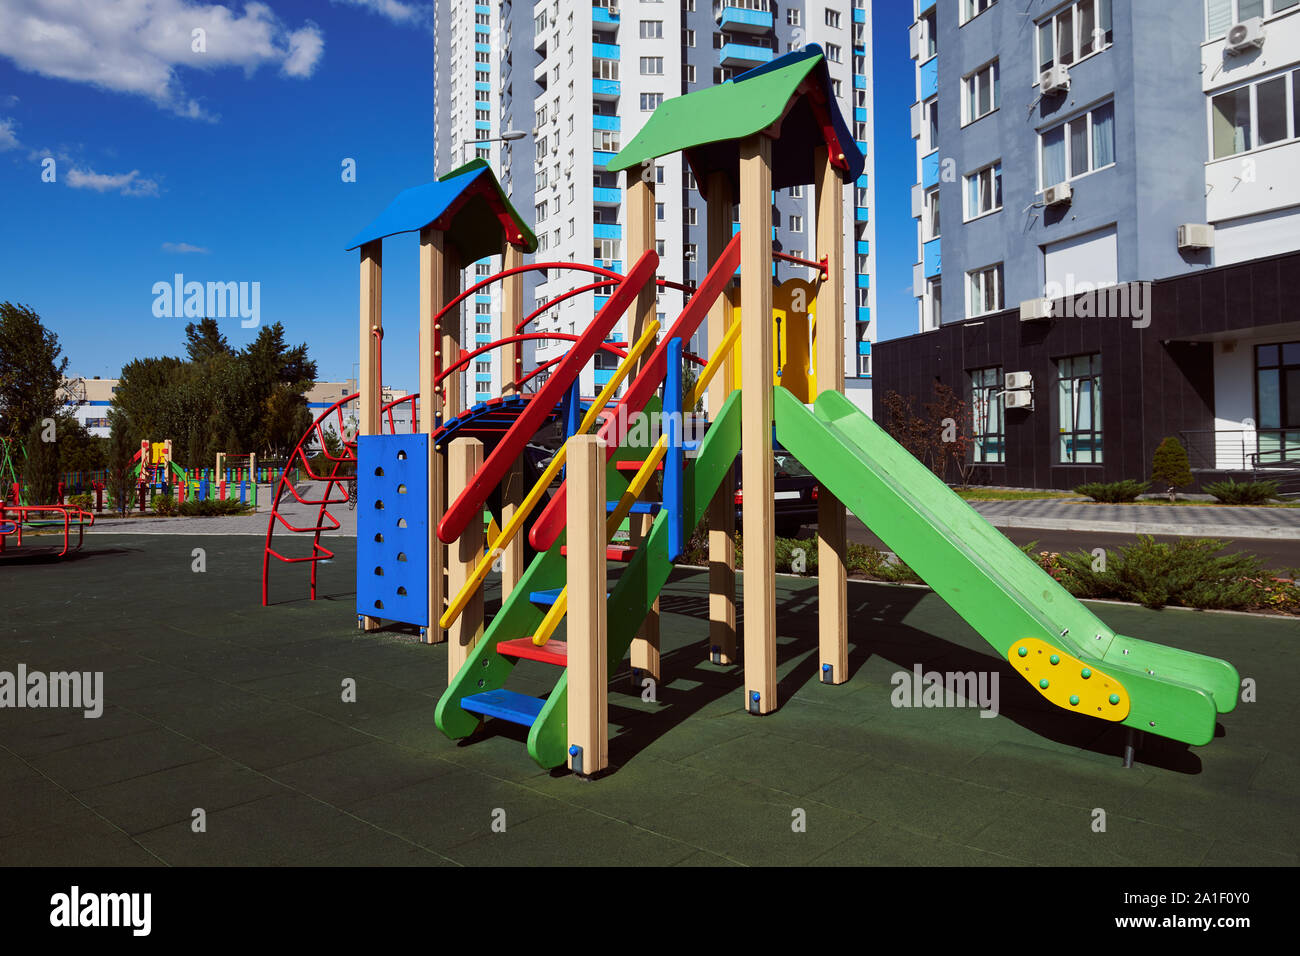 https://c8.alamy.com/comp/2A1F0Y0/empty-colorful-wooden-childrens-slide-with-ladder-on-the-playground-attraction-located-in-the-yard-against-high-rise-building-and-blue-sky-2A1F0Y0.jpg